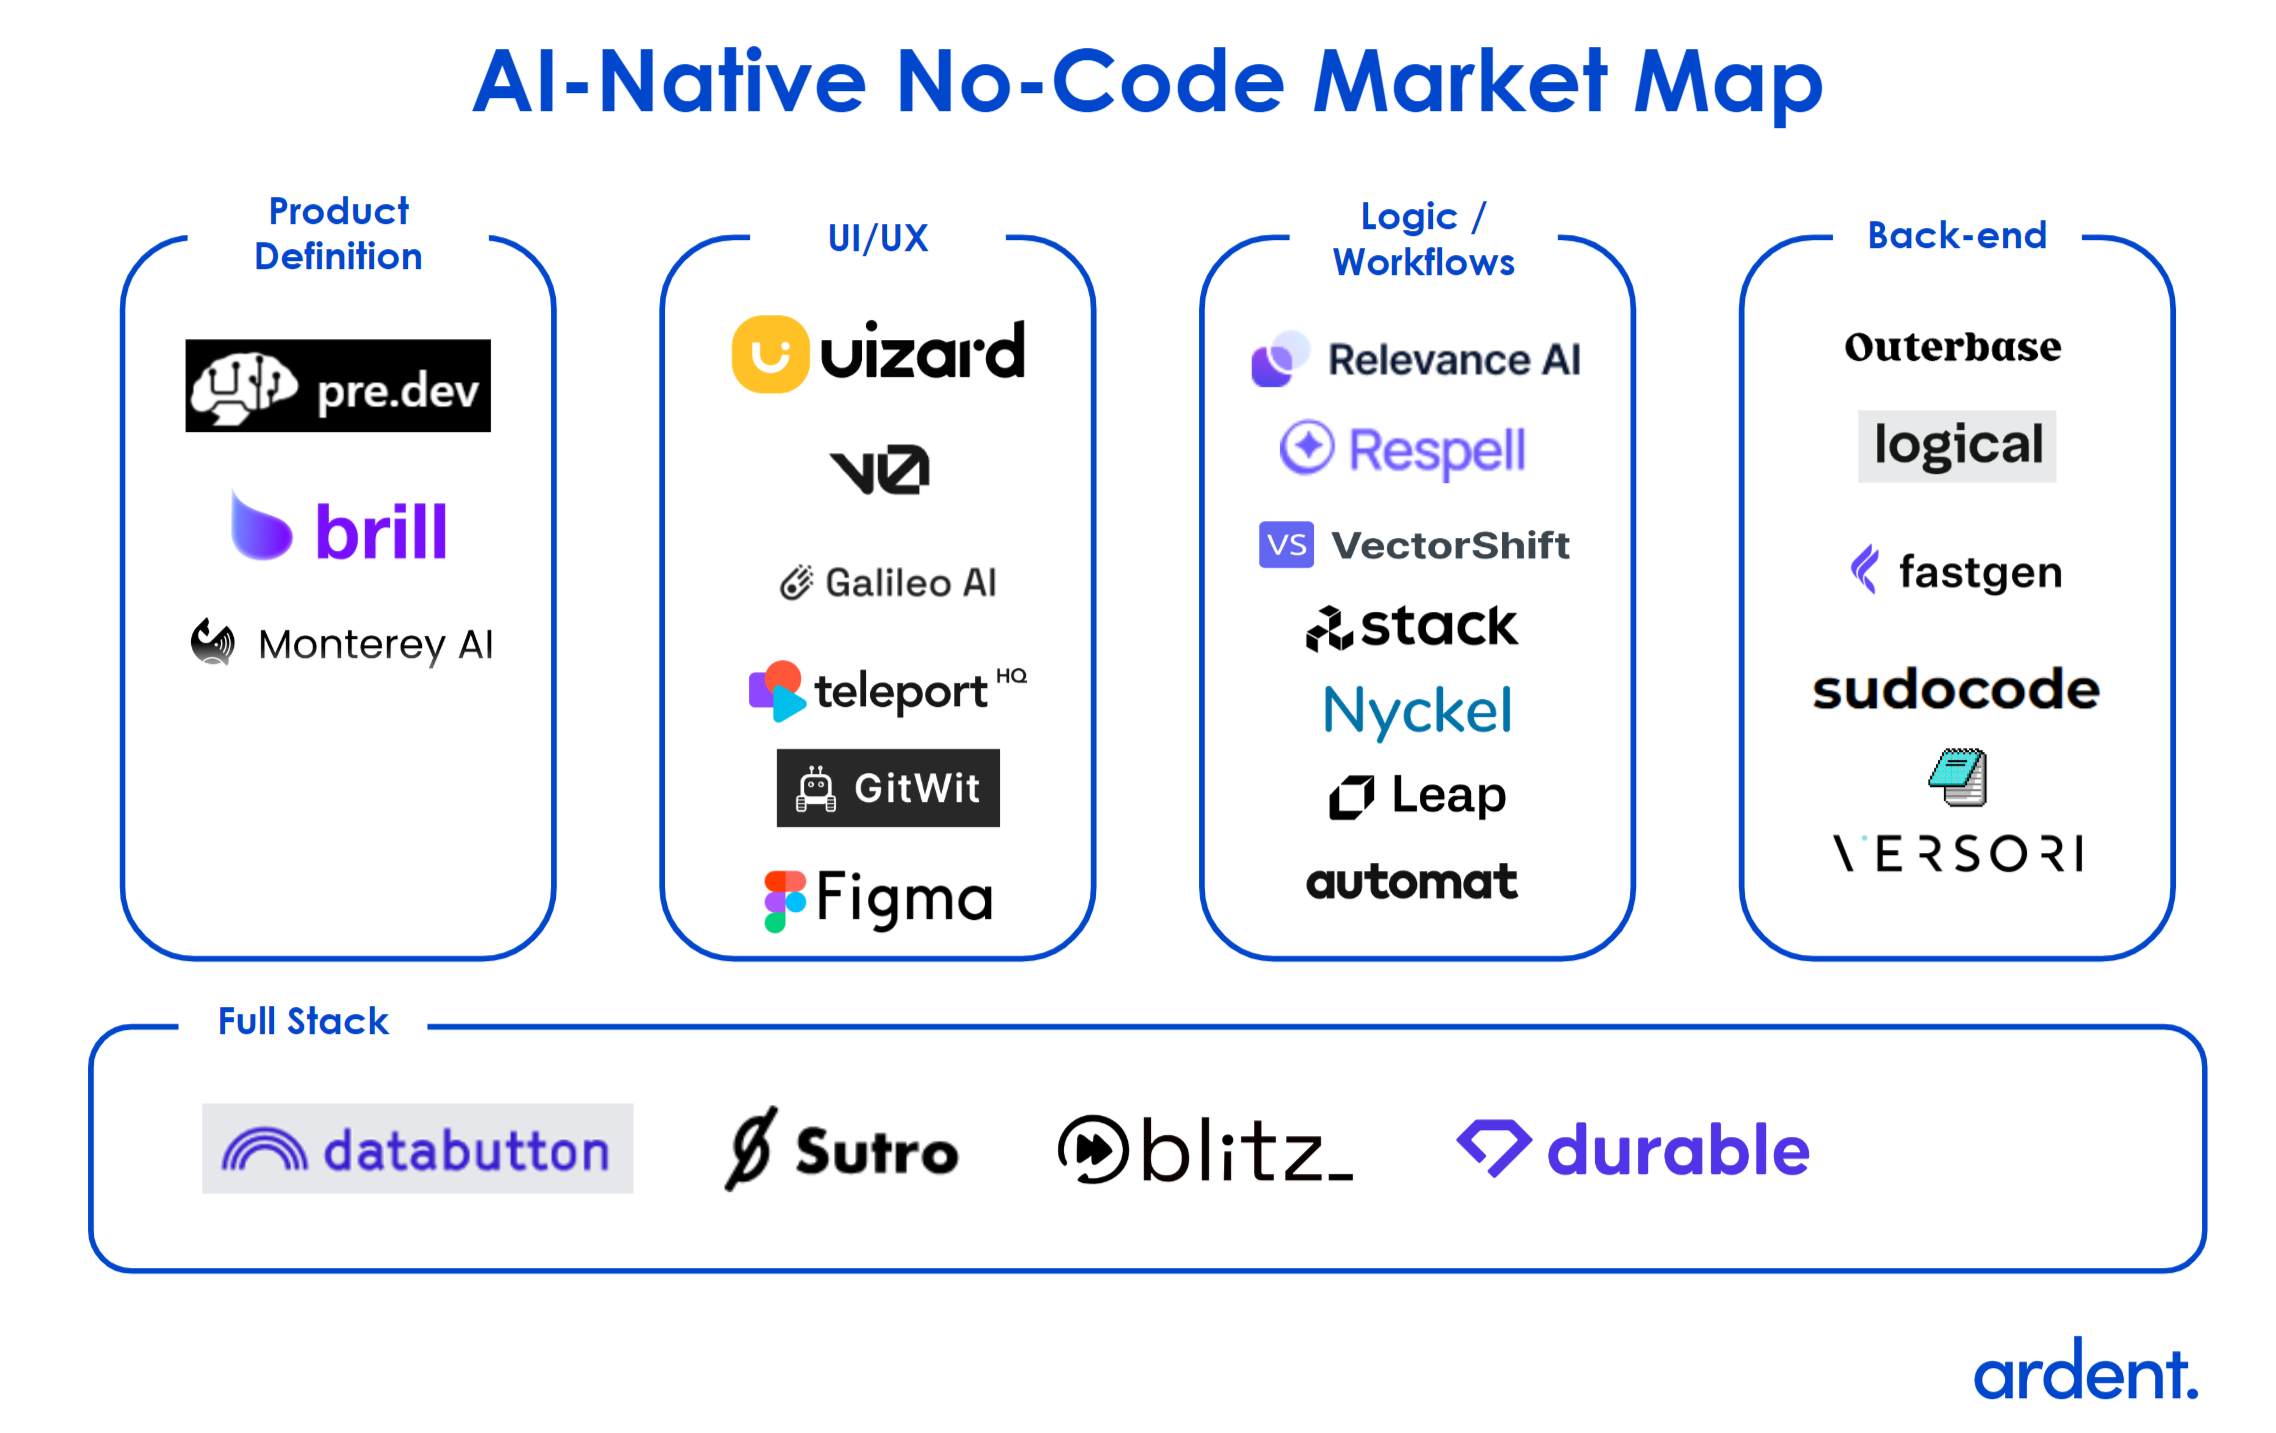 The next generation of no-code is AI-native.